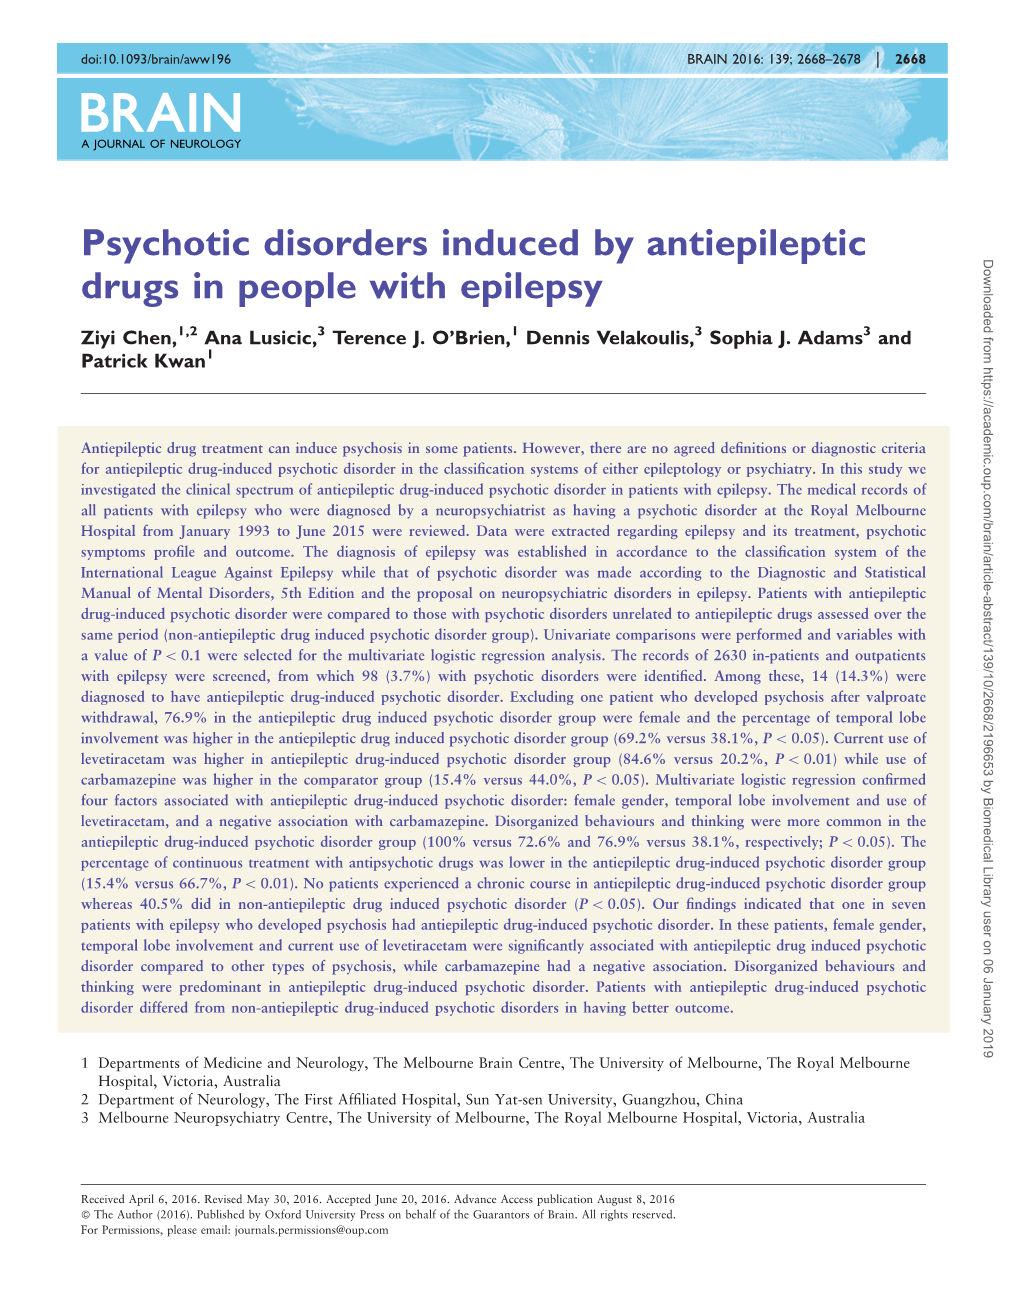 Psychotic Disorders Induced by Antiepileptic Drugs in People With